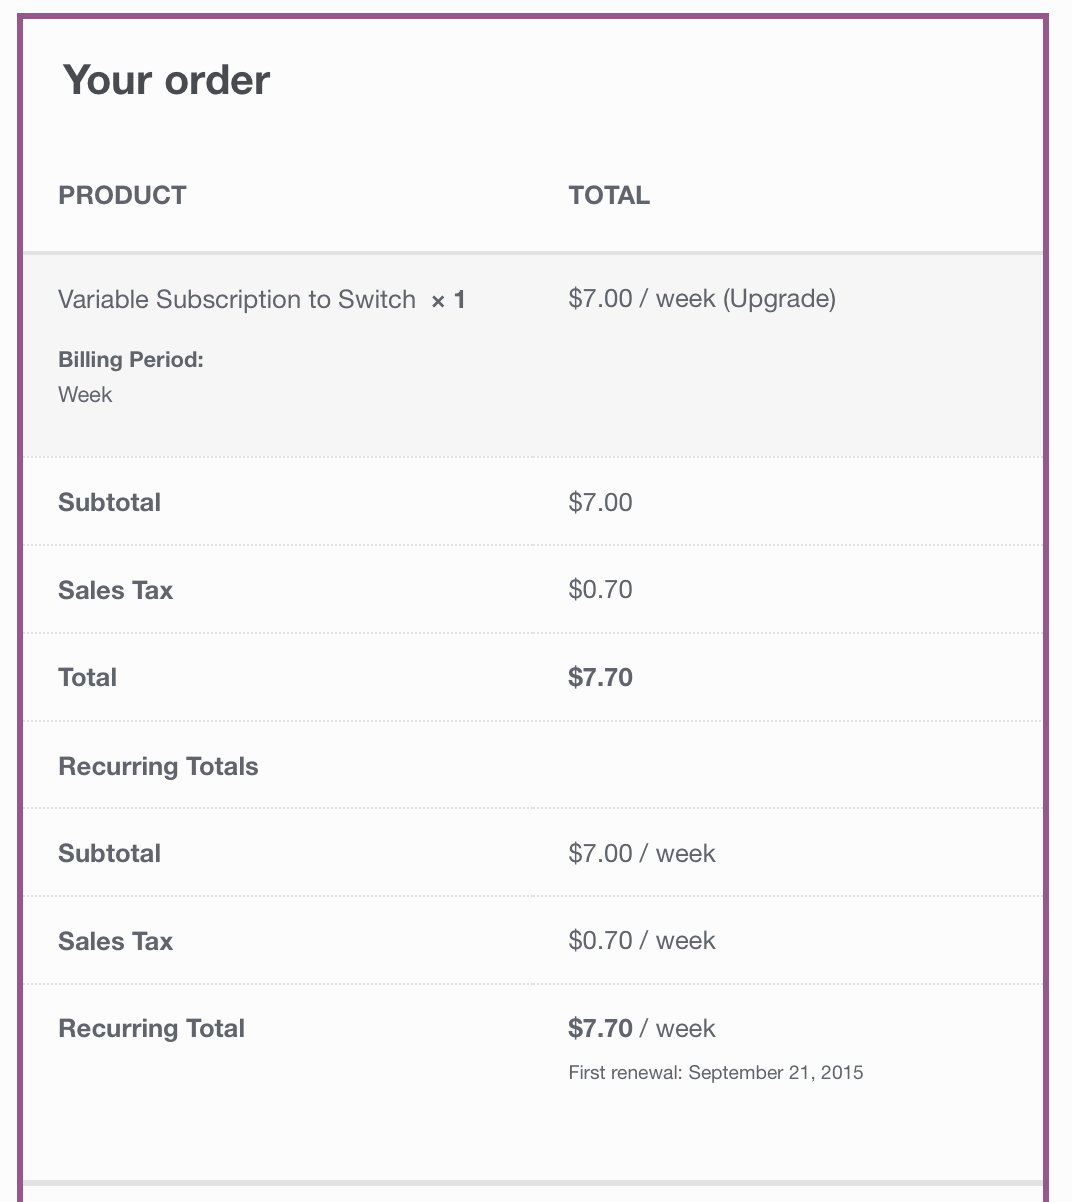 Subscription Upgrade Order Totals on Checkout